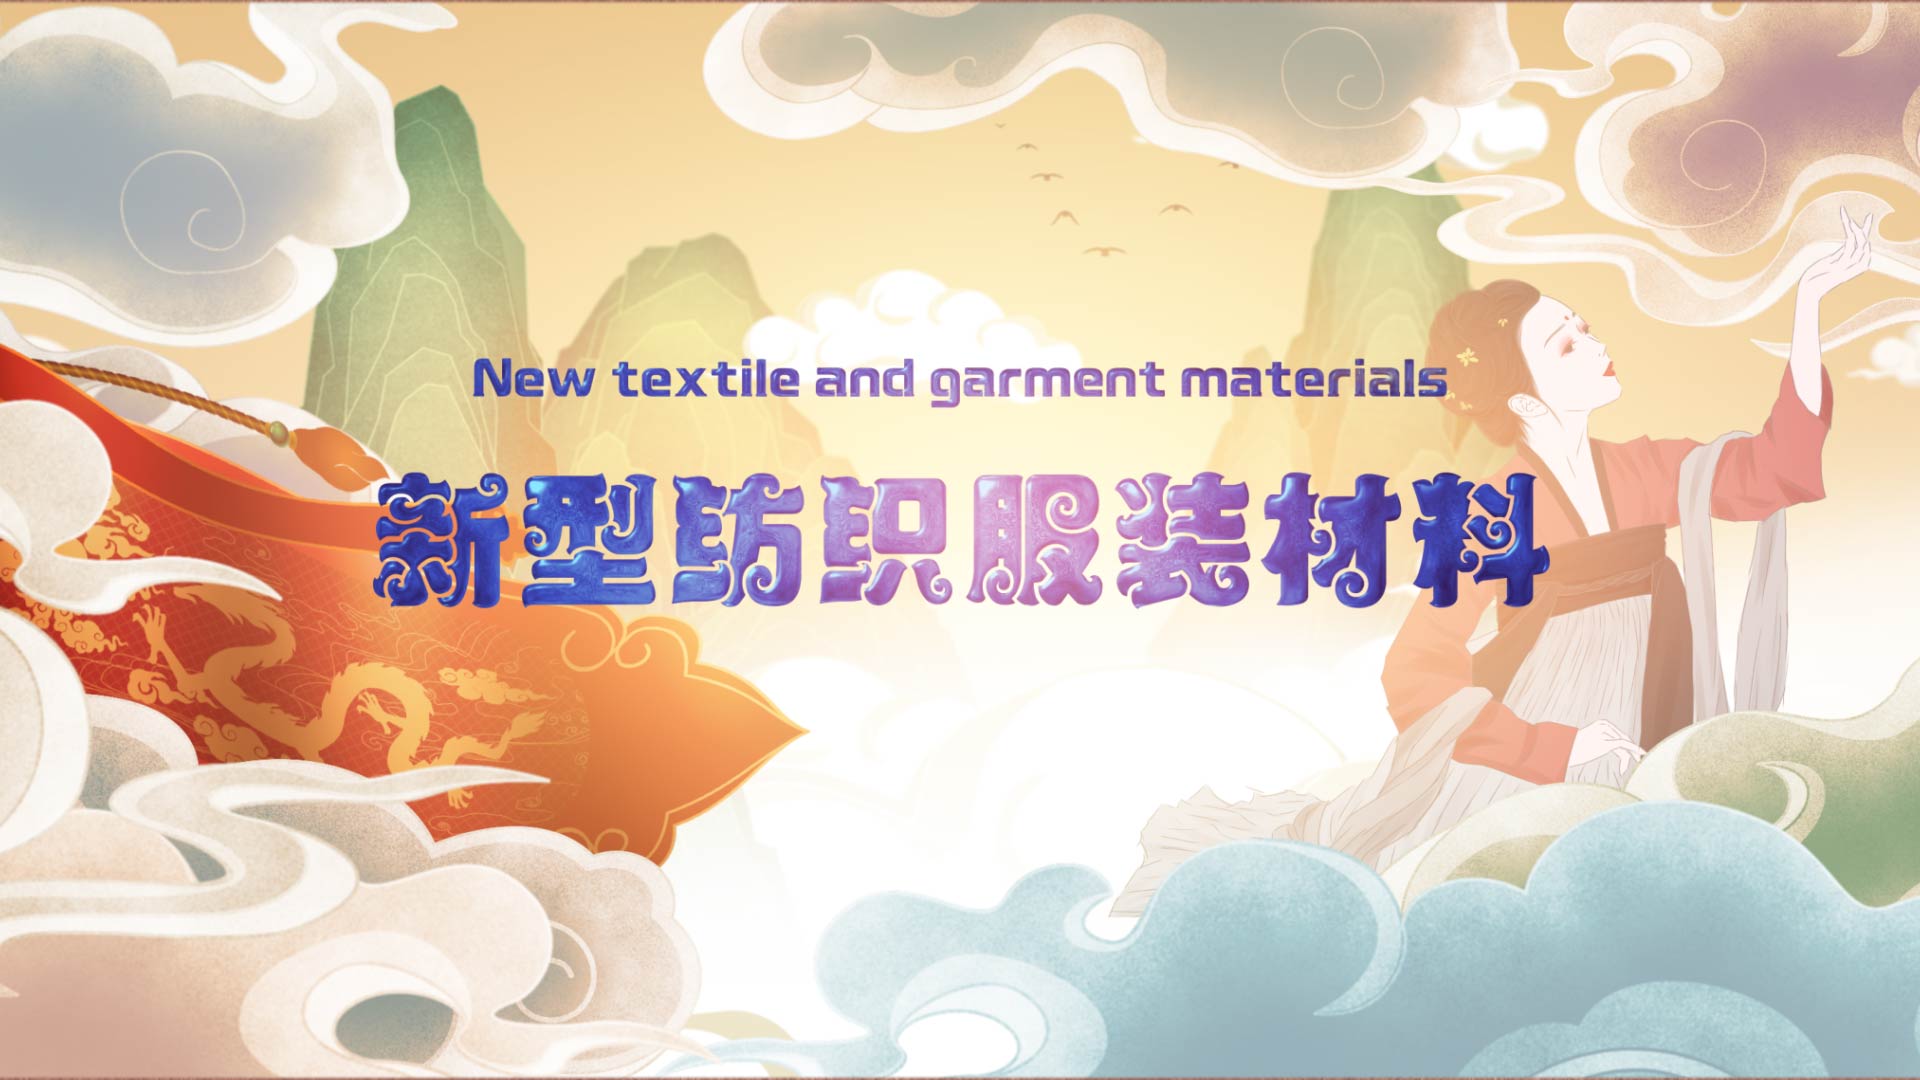 New textile and garment materials